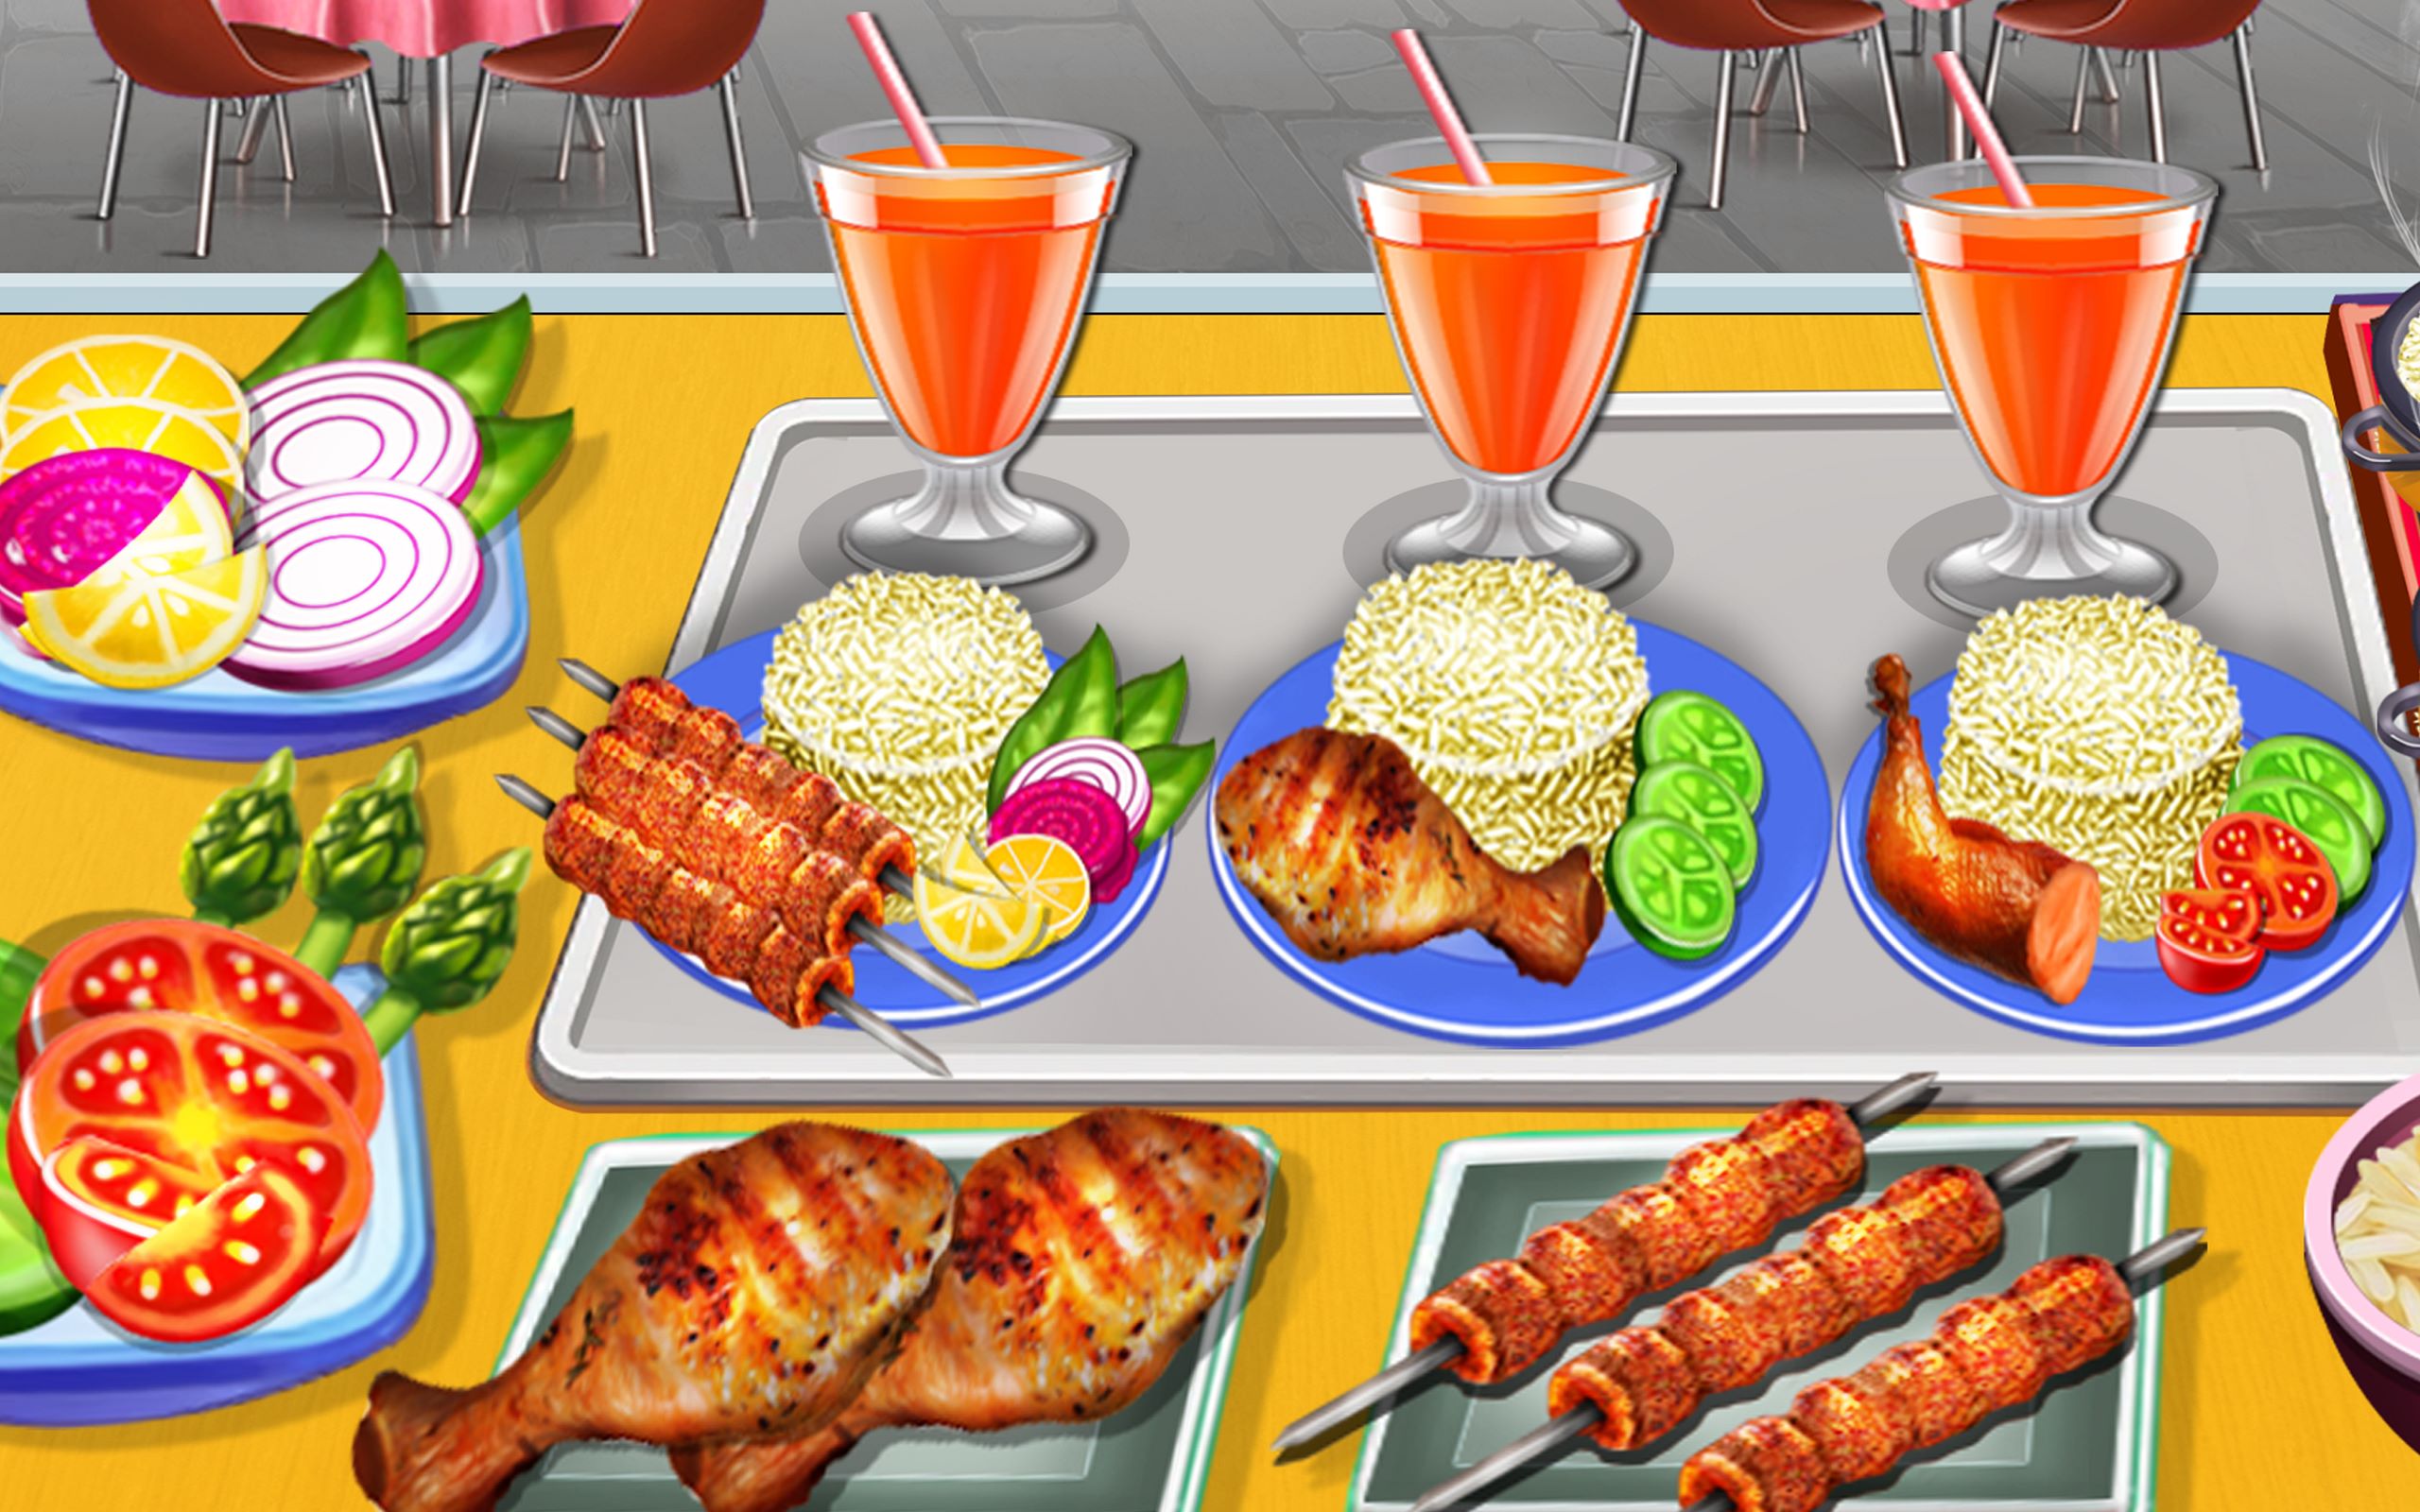 Indian Cooking Madness - Restaurant Cooking Games - Microsoft Apps